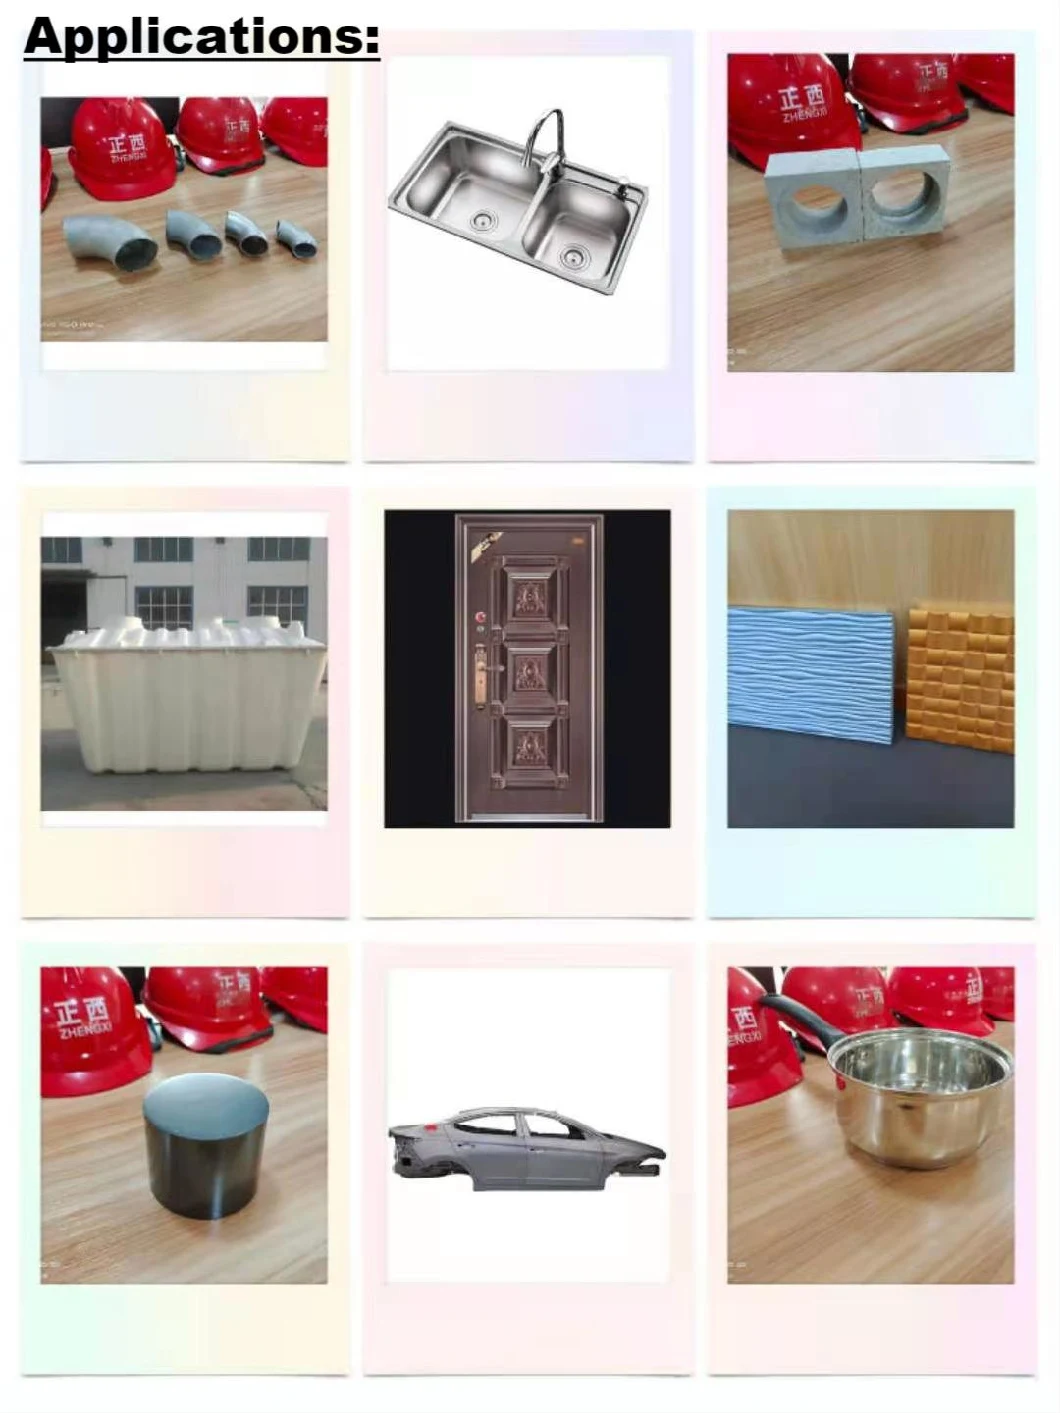 Rubber Raw Material Machinery/Motorcycle Vulcanizing Machine Hydraulic Press Machine Hydraulic Press Machinery Hydraulic Press